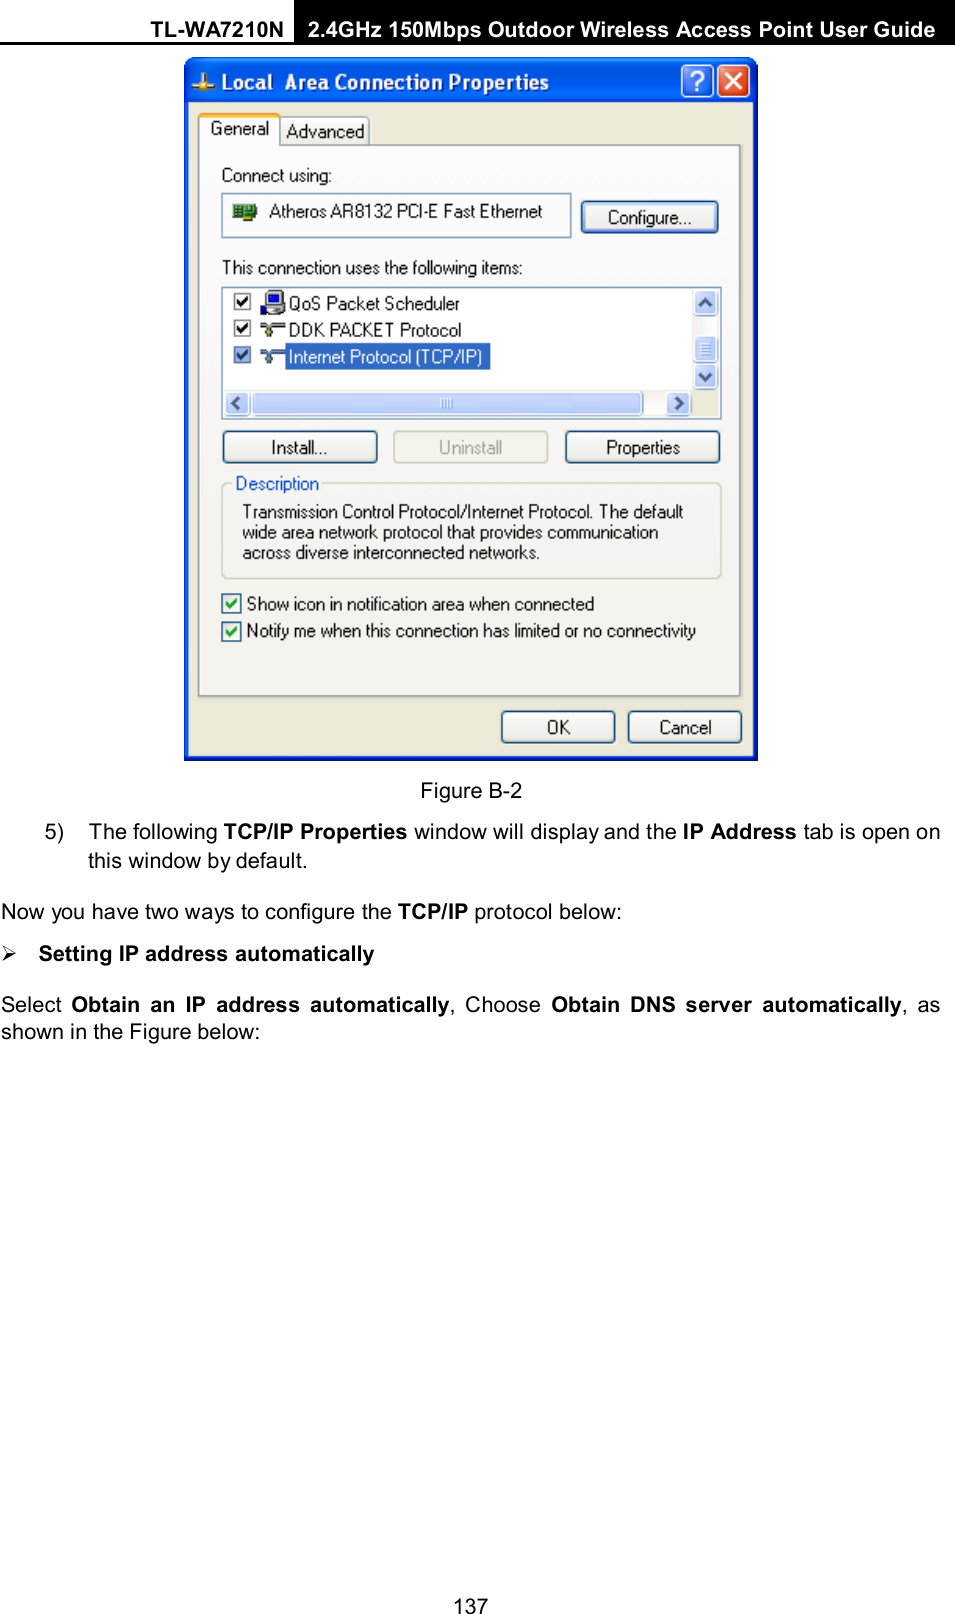 TL-WA7210N 2.4GHz 150Mbps Outdoor Wireless Access Point User Guide  137 Figure B-2 5) The following TCP/IP Properties window will display and the IP Address tab is open on this window by default. Now you have two ways to configure the TCP/IP protocol below:  Setting IP address automatically Select  Obtain an IP address automatically,  Choose  Obtain  DNS server automatically, as shown in the Figure below: 